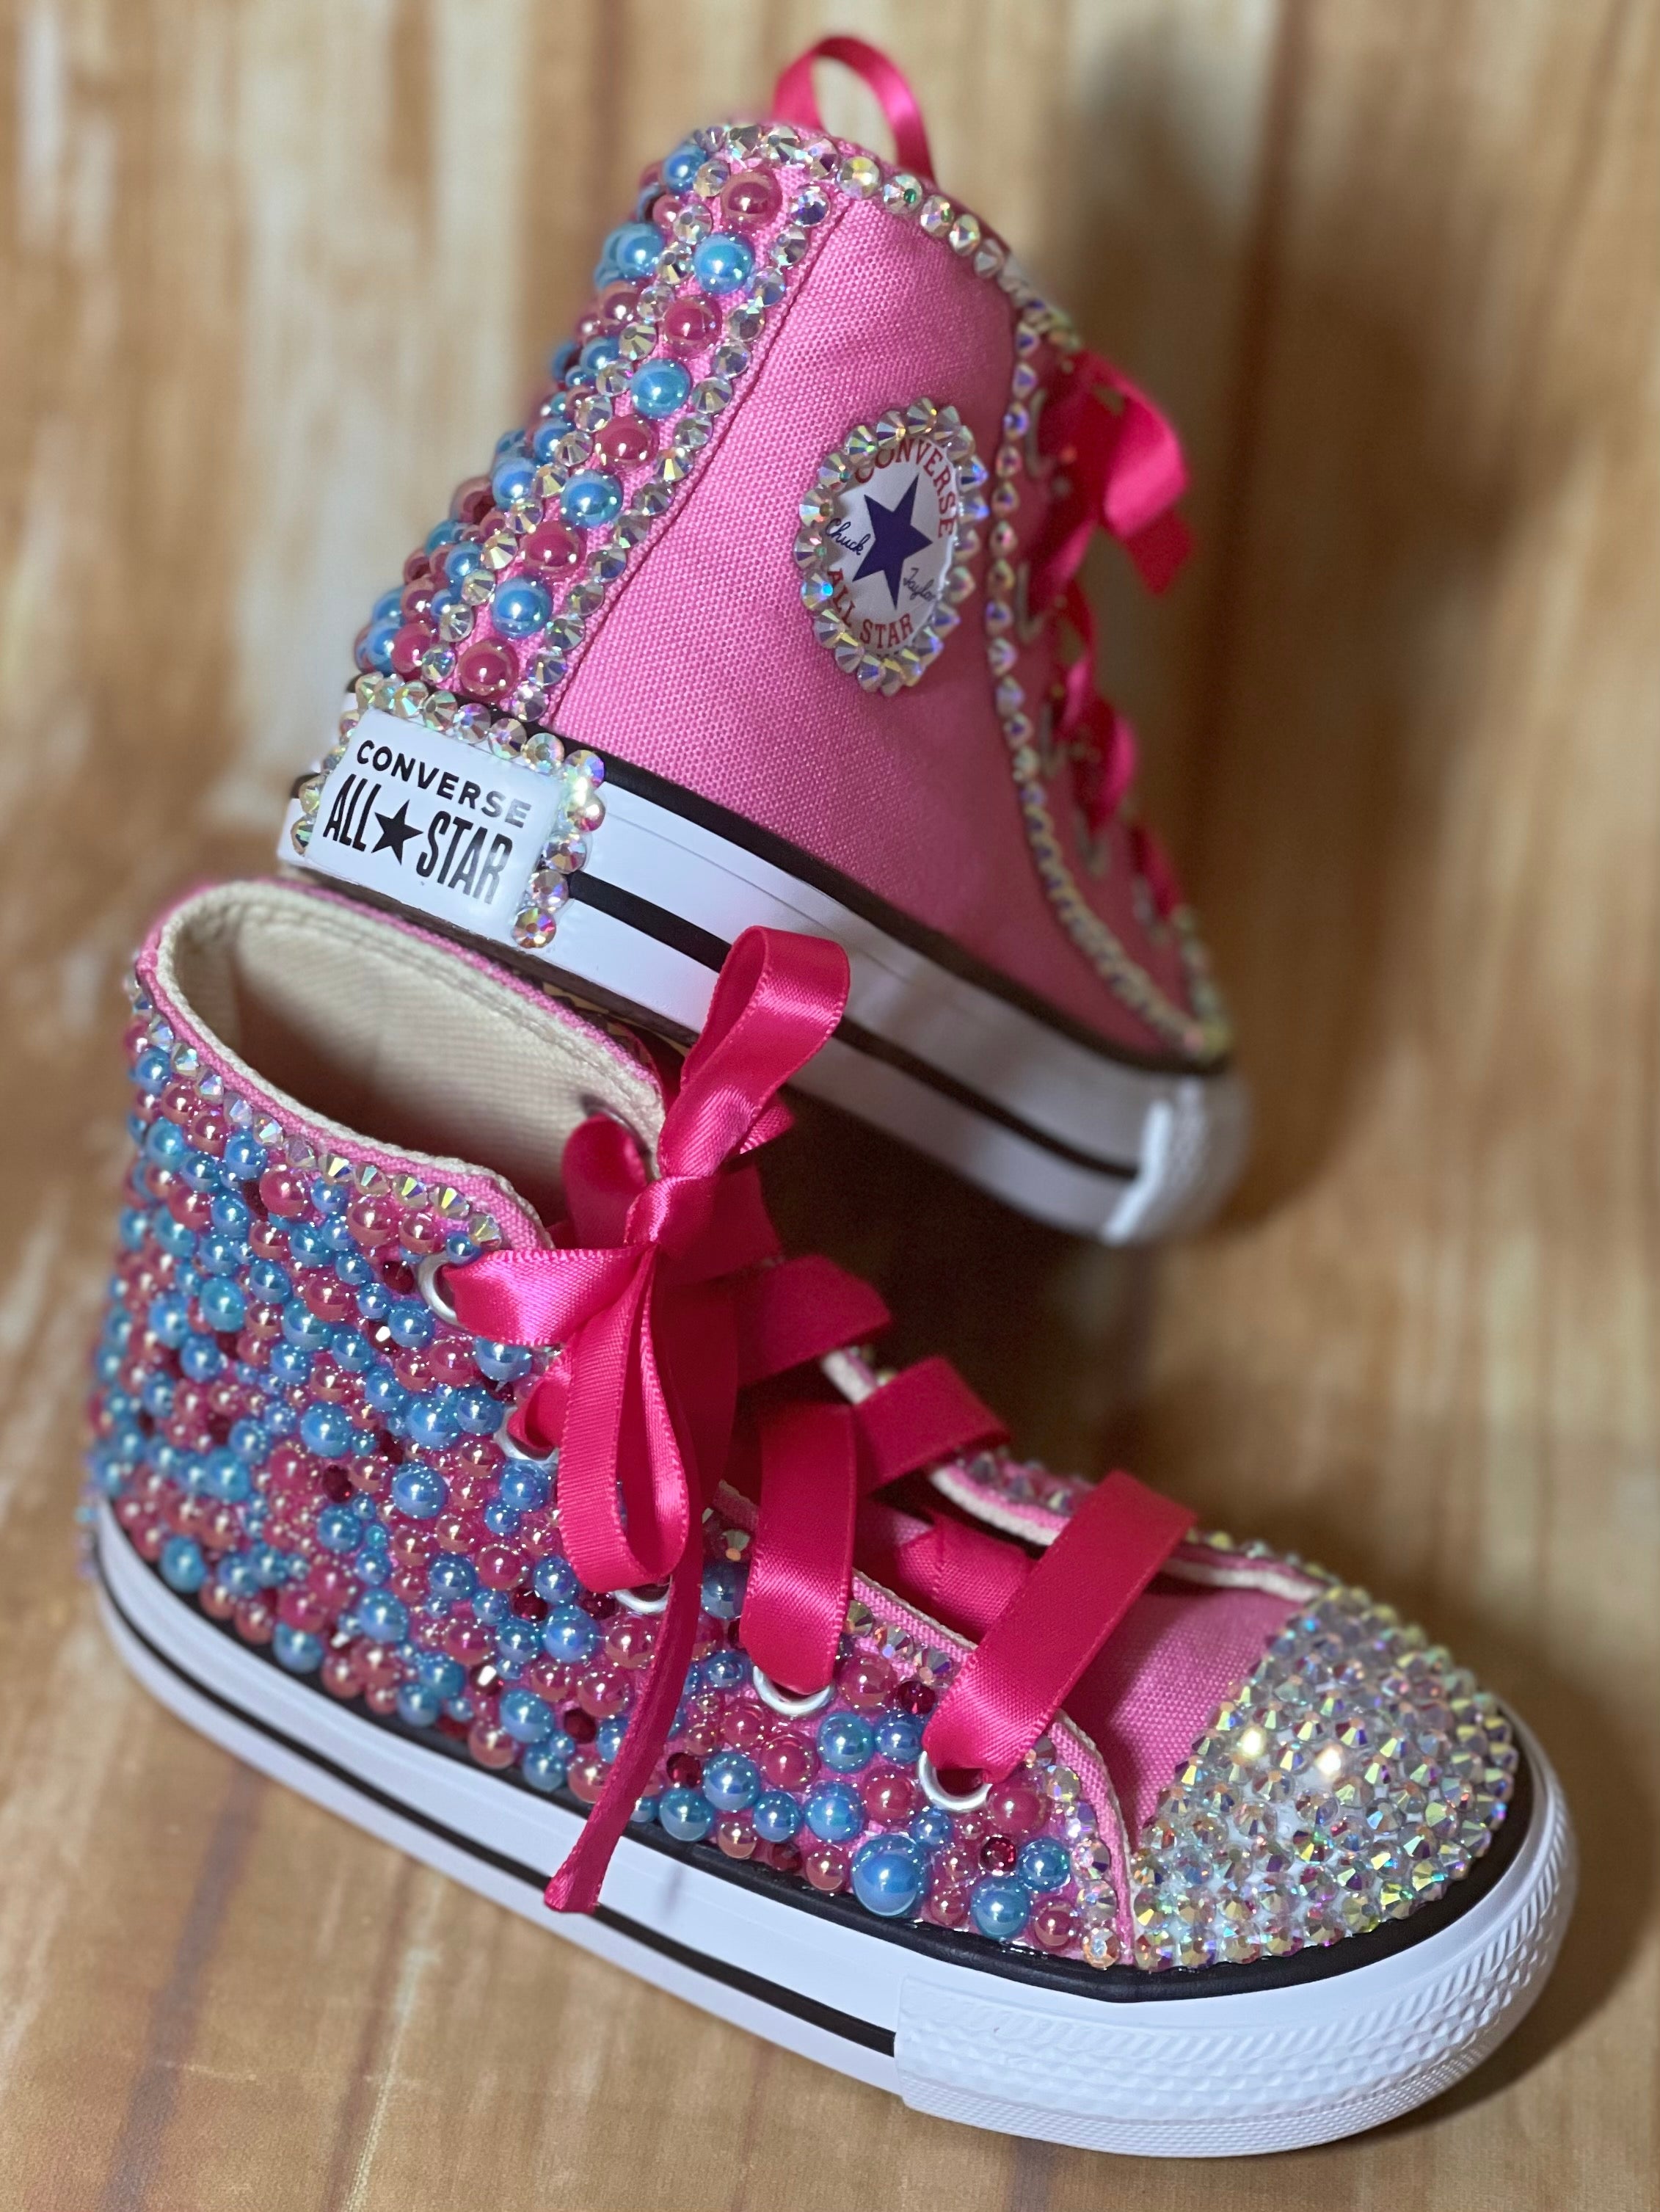 Pink Bedazzled Converse Sneakers | Little Ladybug Tutus